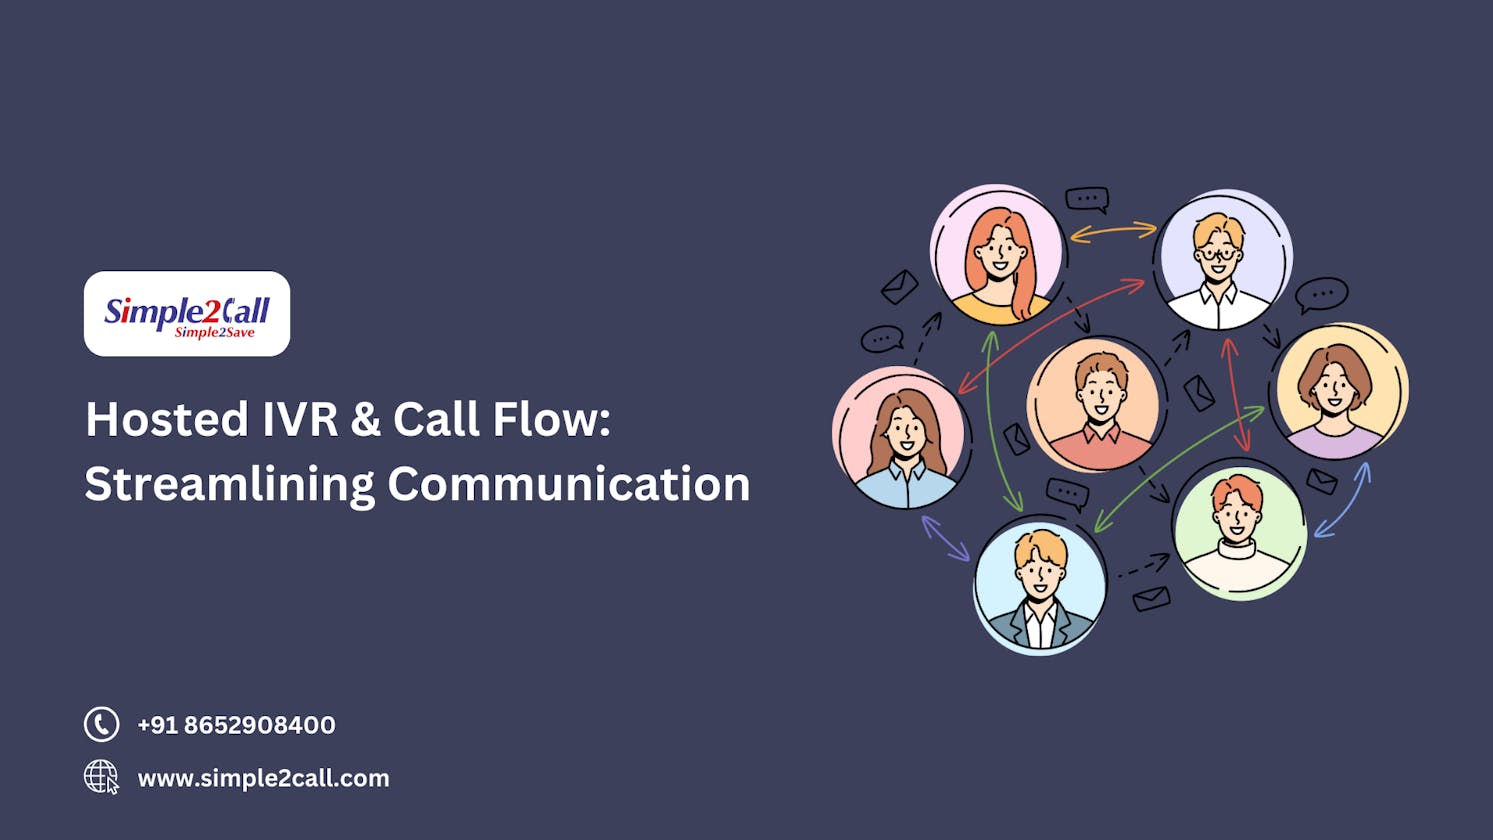 Hosted IVR & Call Flow: Streamlining Communication